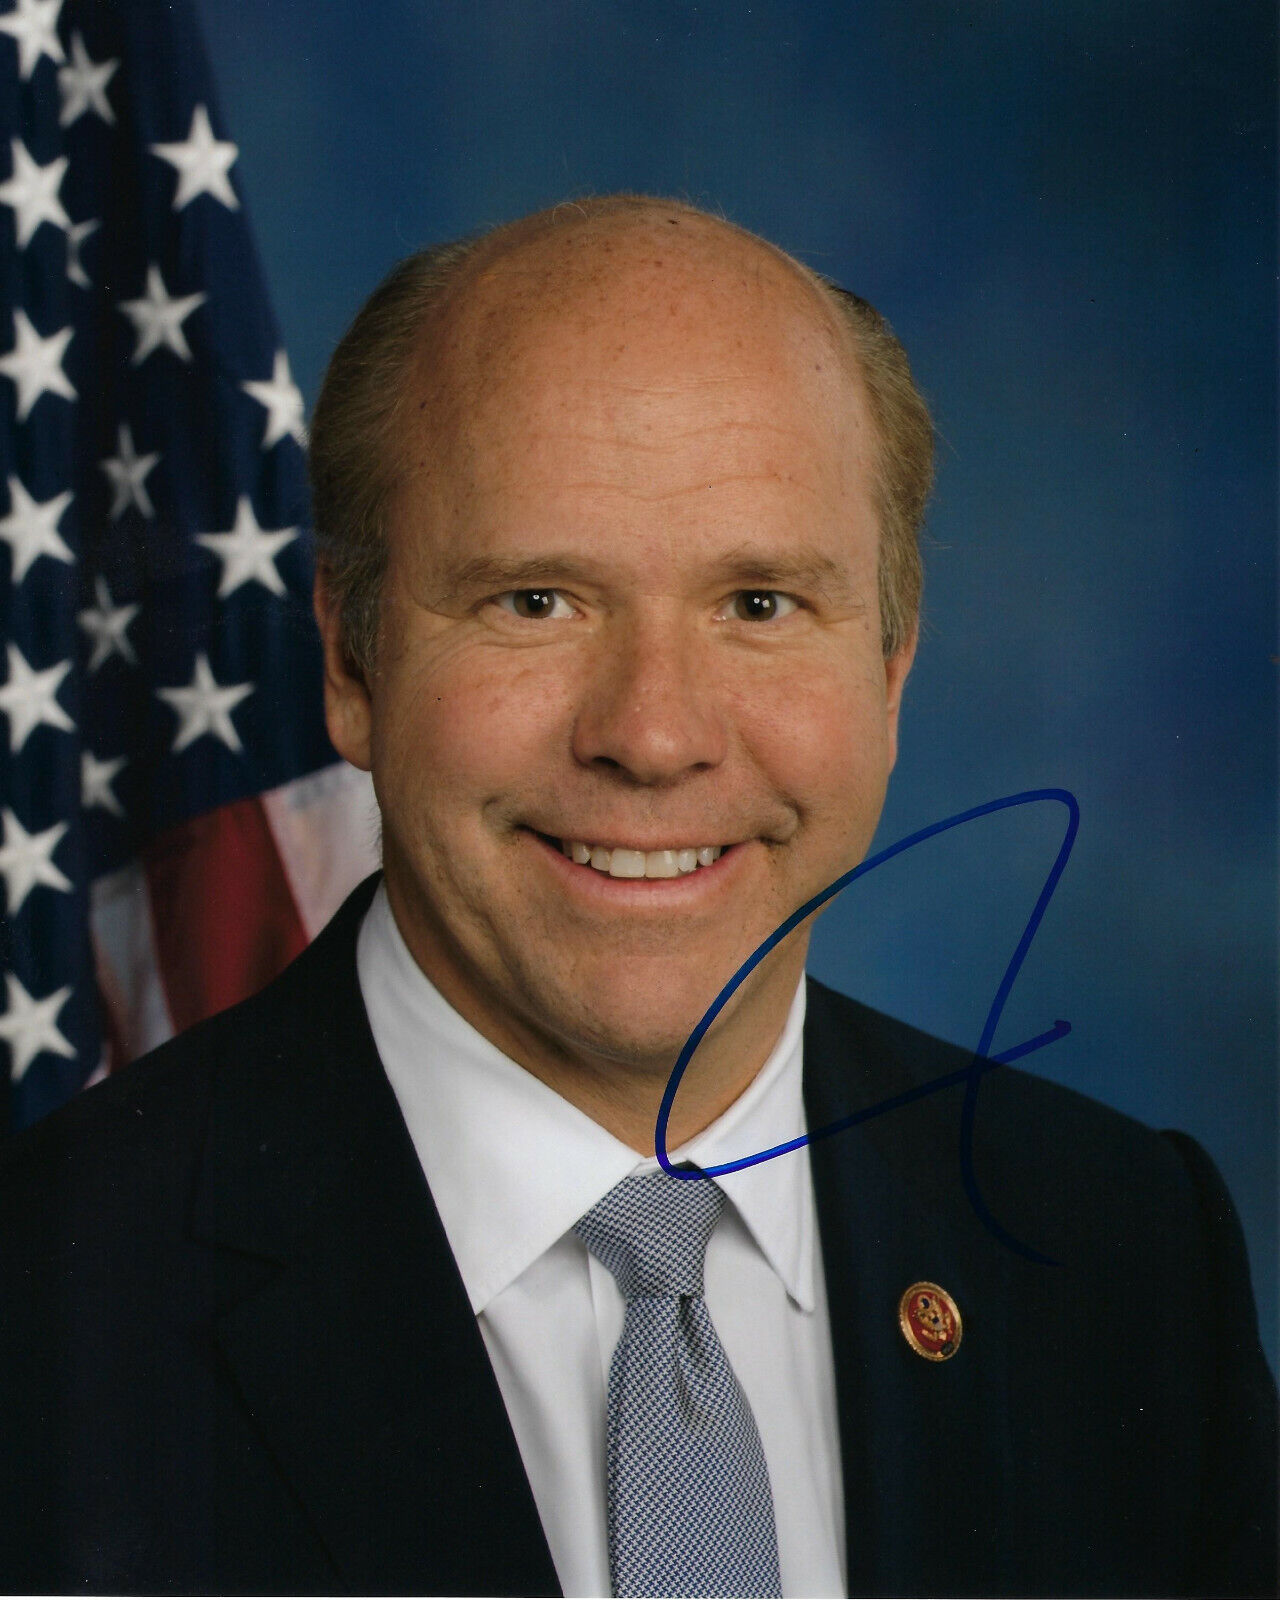 JOHN DELANEY - 2020 DEMOCRATIC CANDIDATE - SIGNED AUTHENTIC 8x10 Photo Poster painting D w/COA